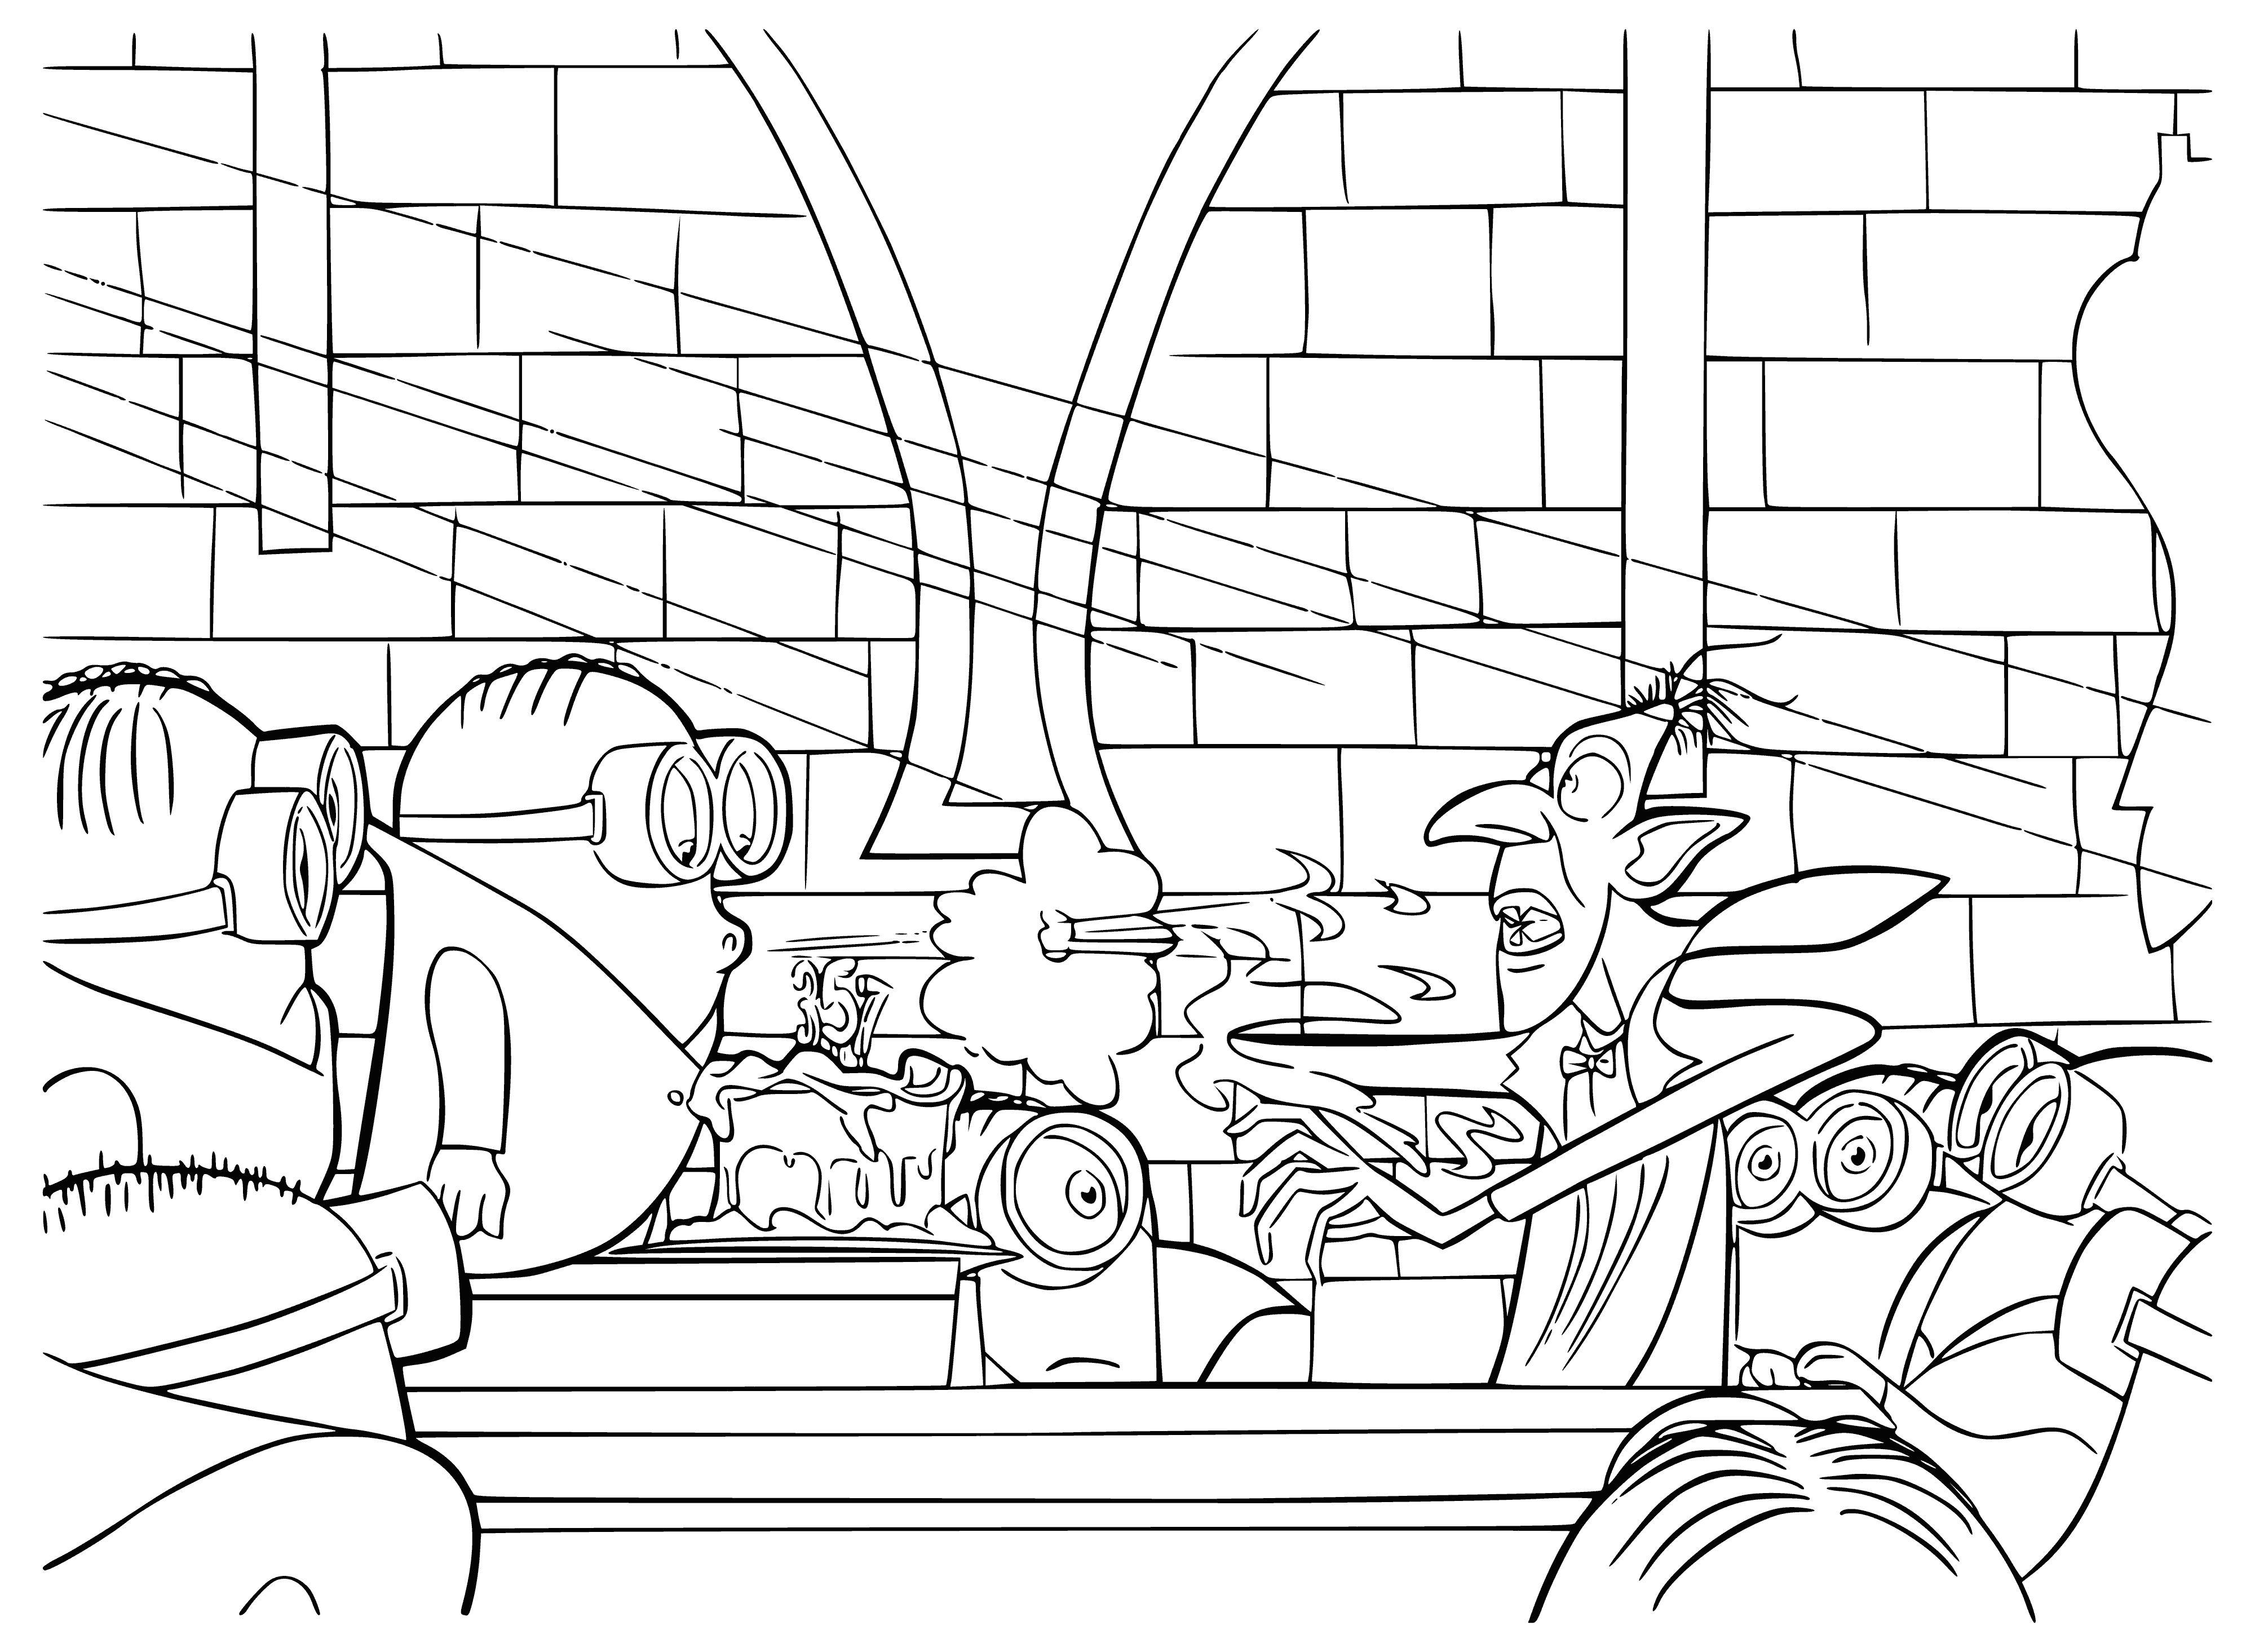 coloring page: Minions gather around Dracula's castle wearing purple costumes and white gloves, some with brooms and others with pumpkins.